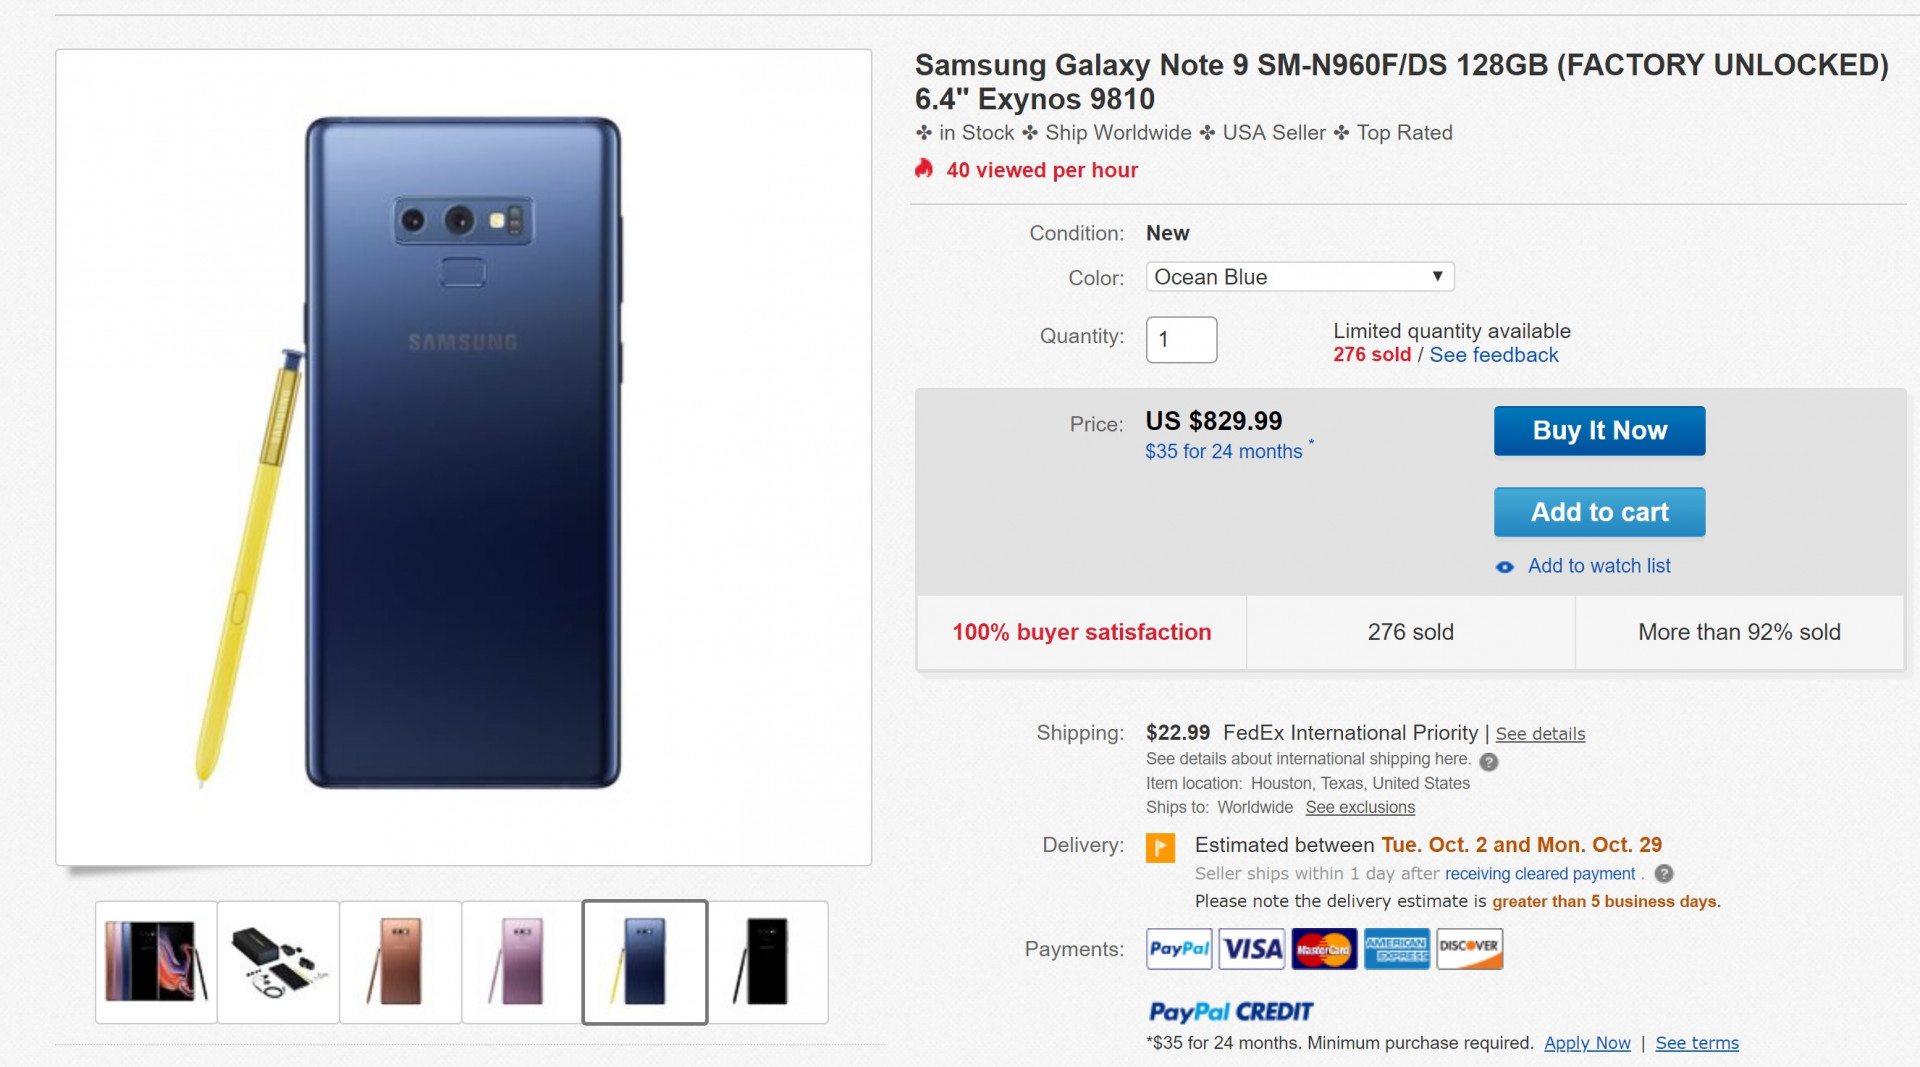 eBay store page deal for the Samsung Galaxy Note 9.